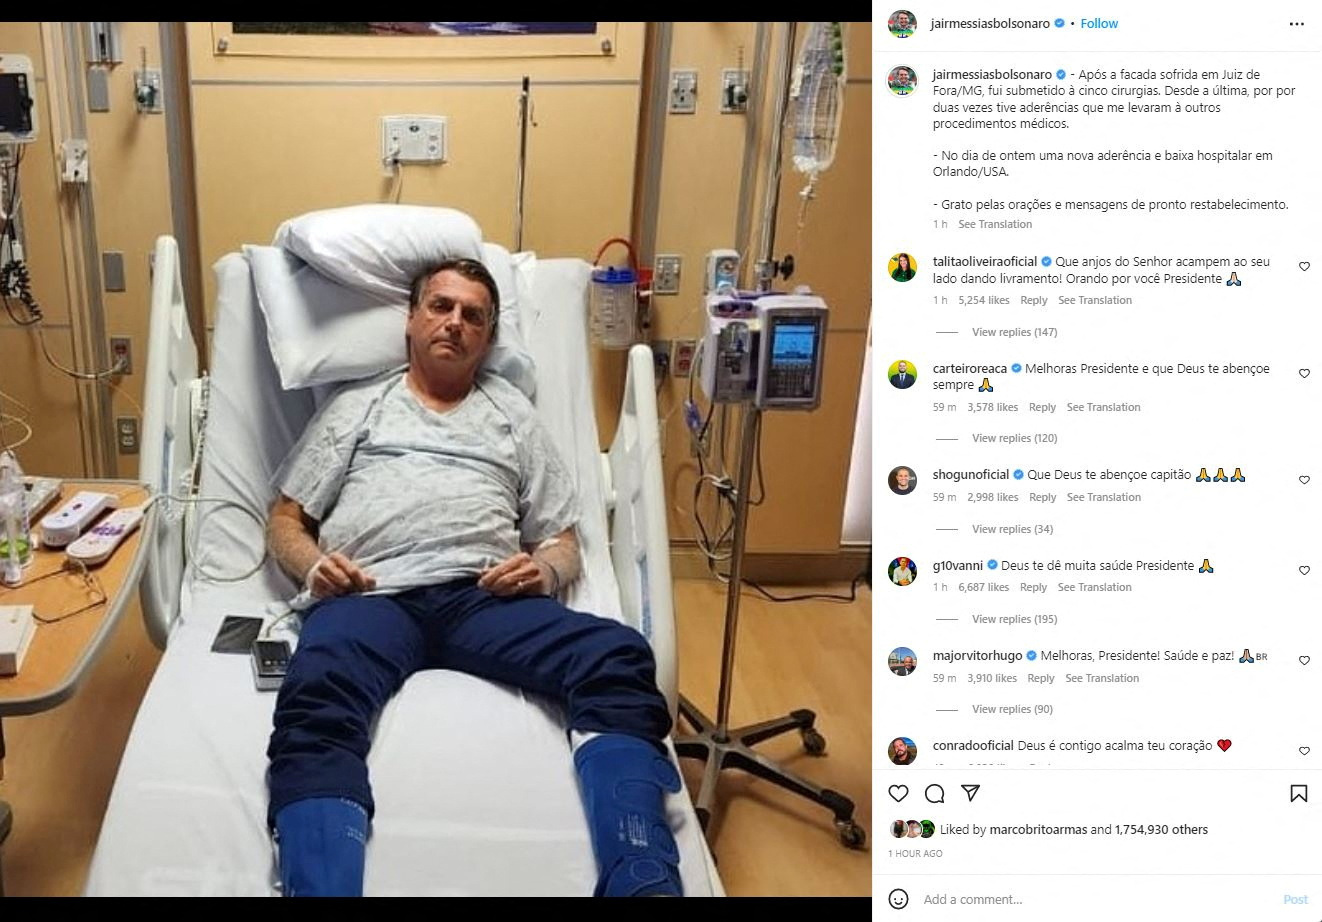 Brazil's Bolsonaro released from hospital in Florida, source says | Reuters